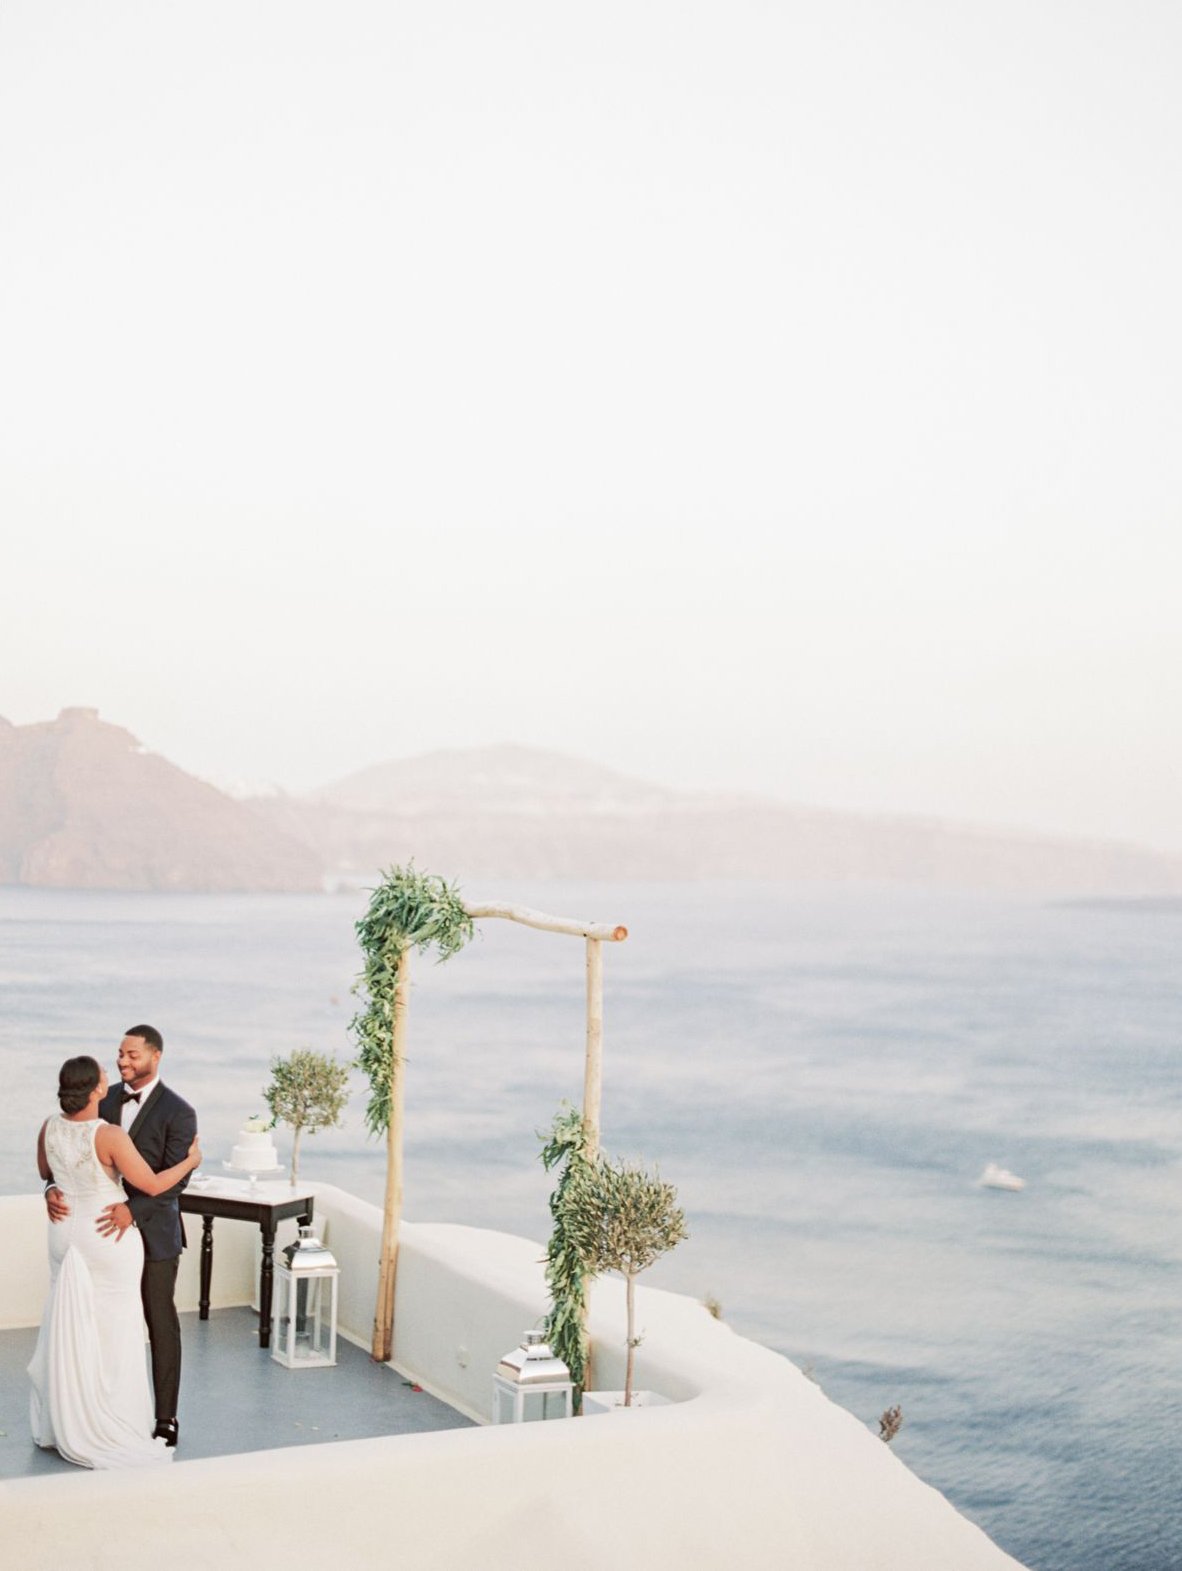 Bride and groom at Canaves Oia, Santorini during first dance